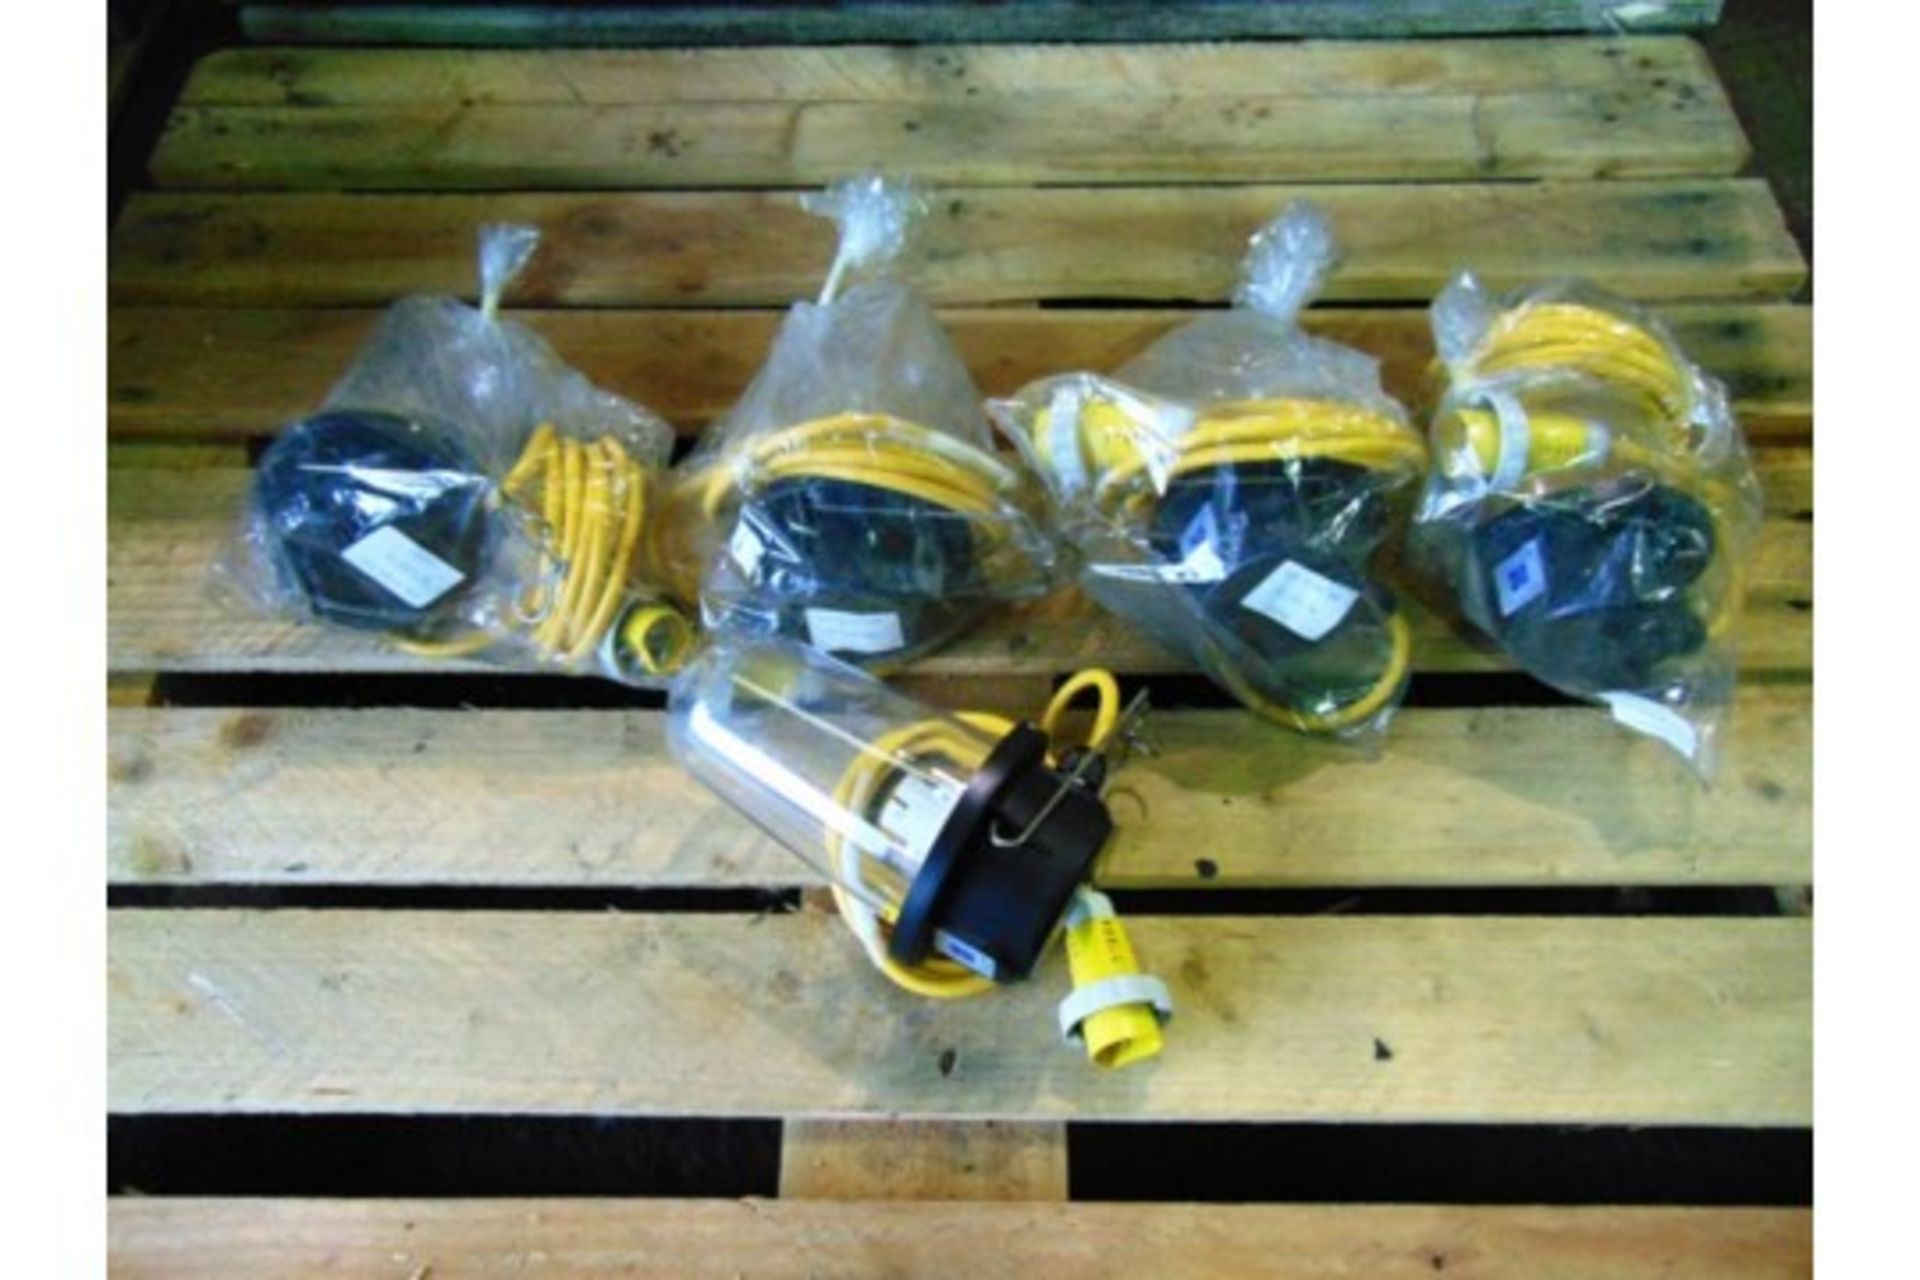 5 x Unissued Lewden Work Lights. They are direct from reserve stores